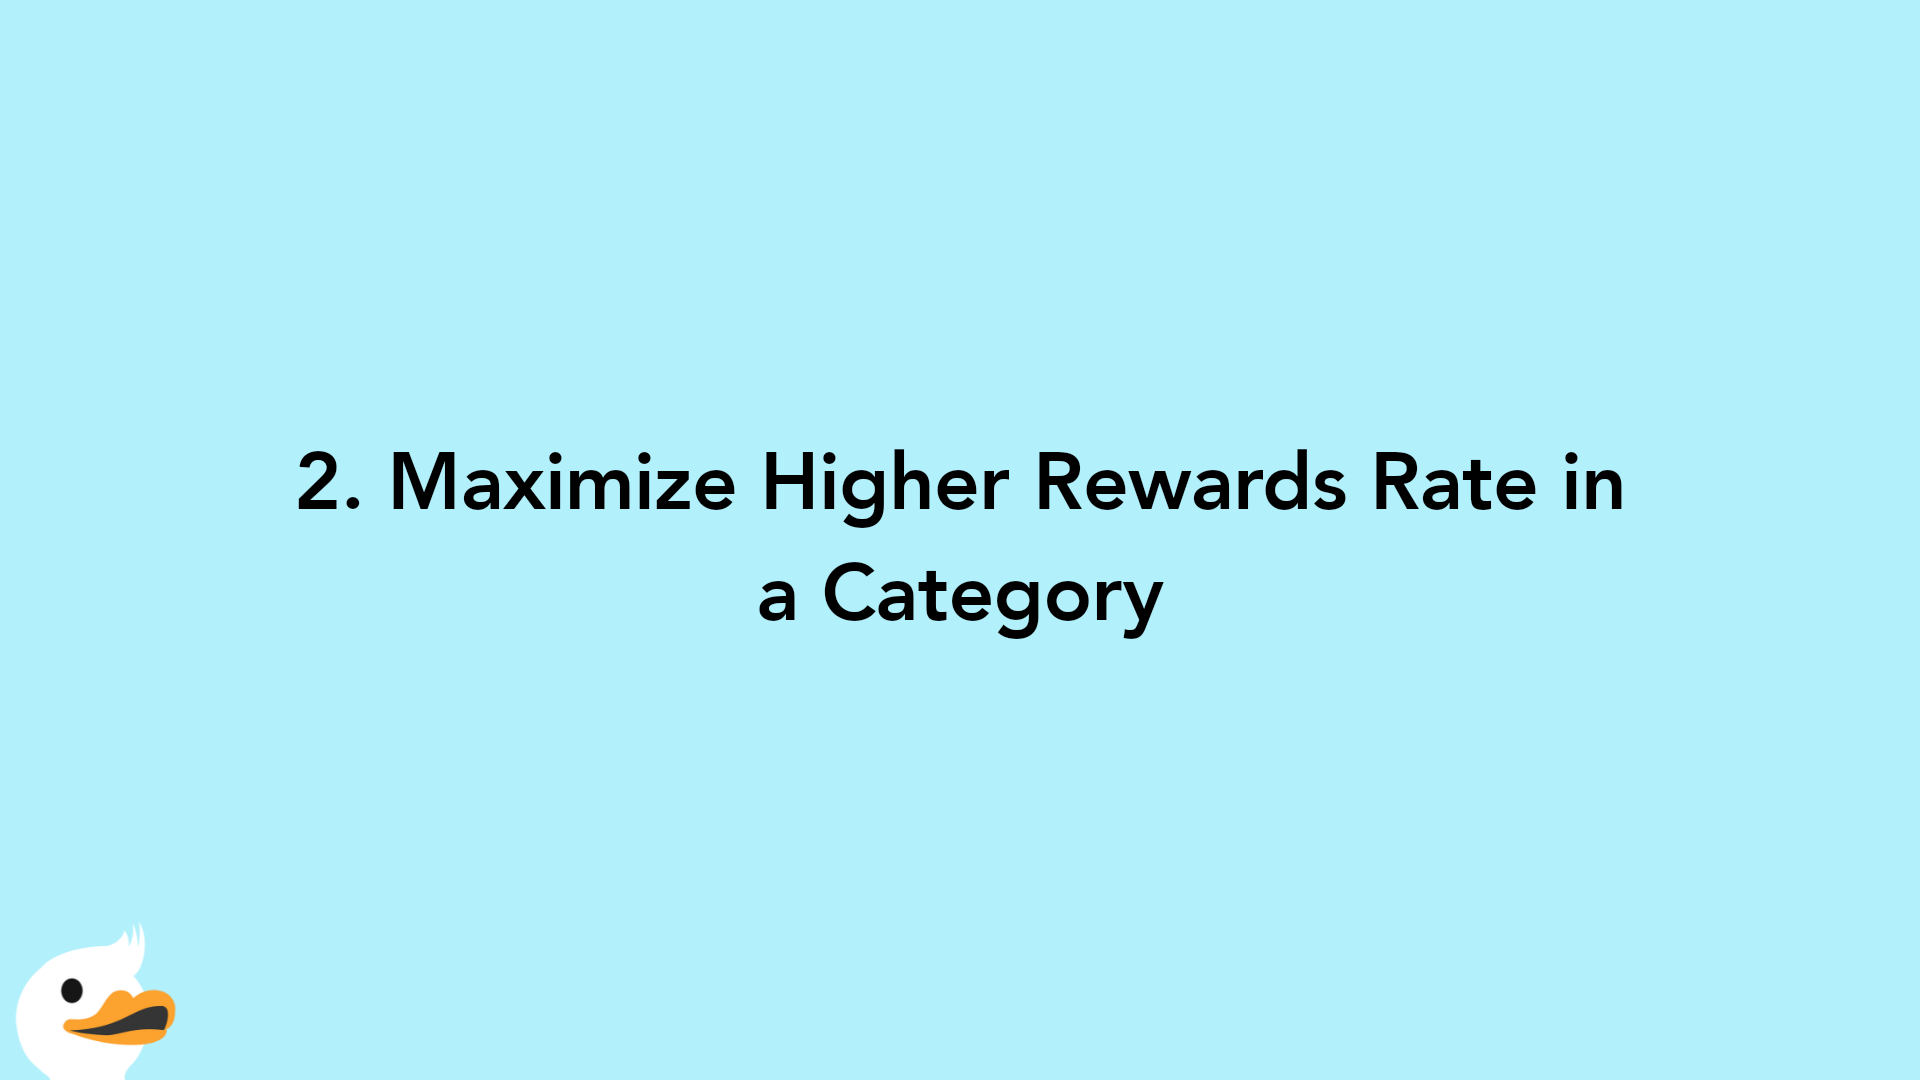 2. Maximize Higher Rewards Rate in a Category